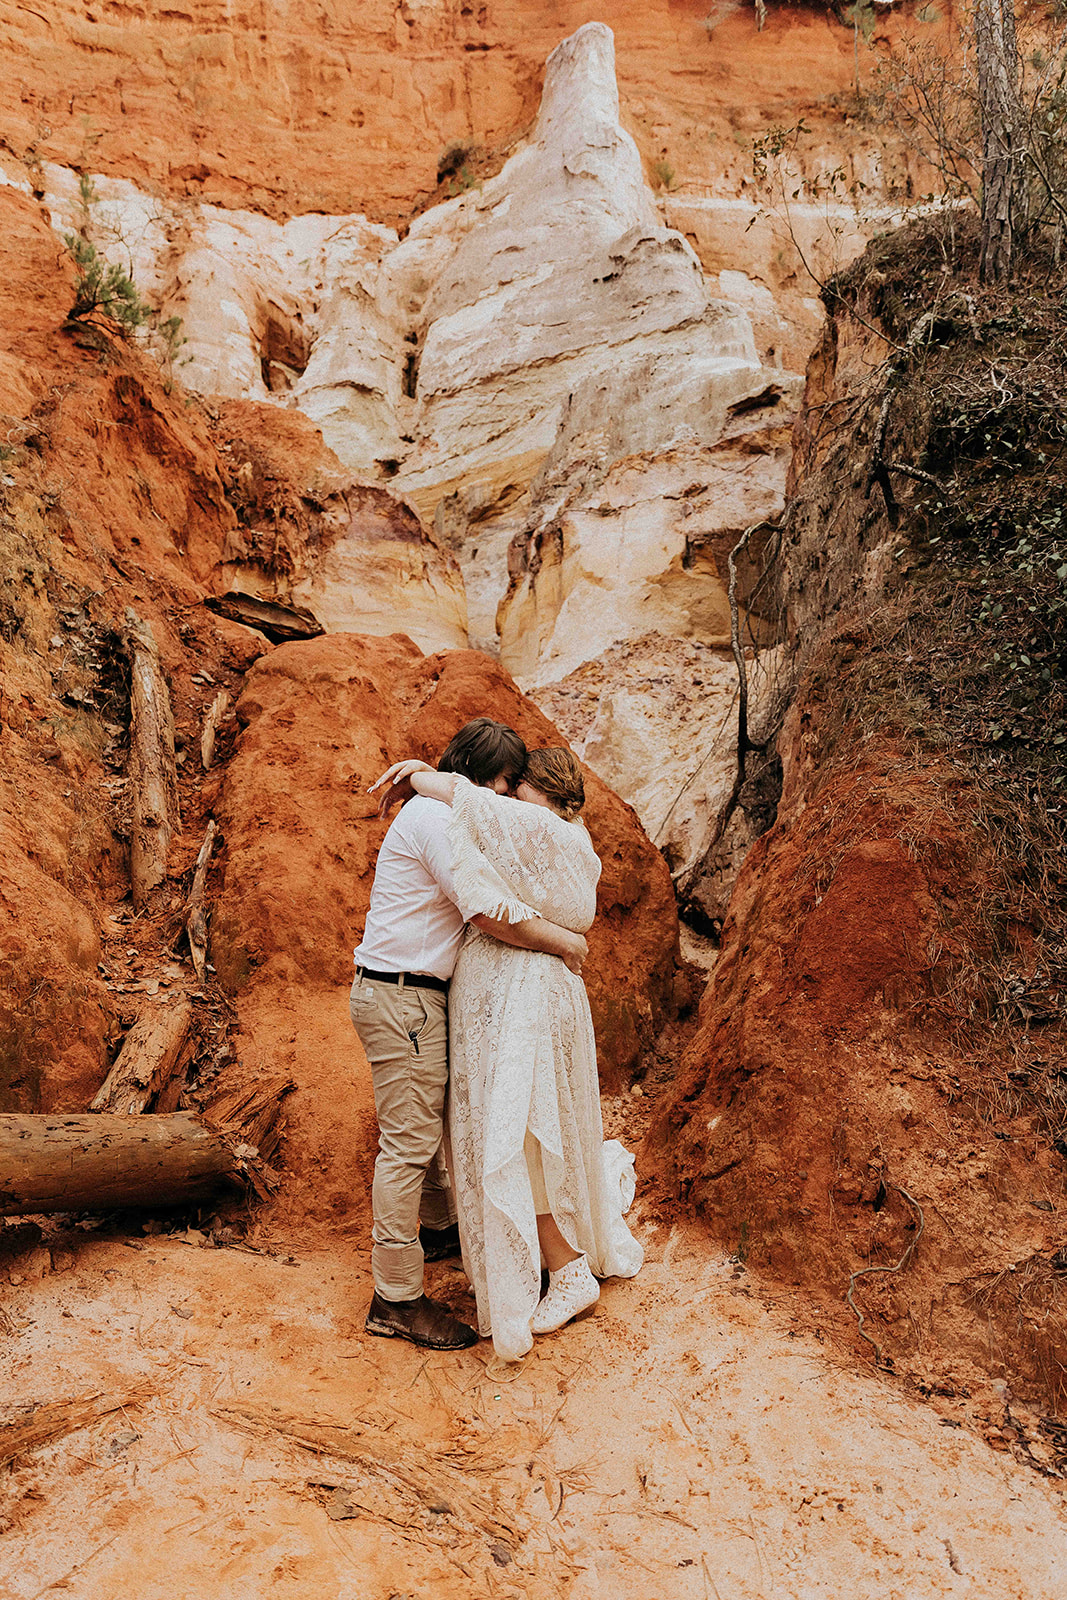 A couple stands back-to-back on a rocky landscape with reddish and white geological formations, surrounded by scattered fallen logs. The woman wears a long cream-colored dress and the man is in casual attire at a georgia elopement location